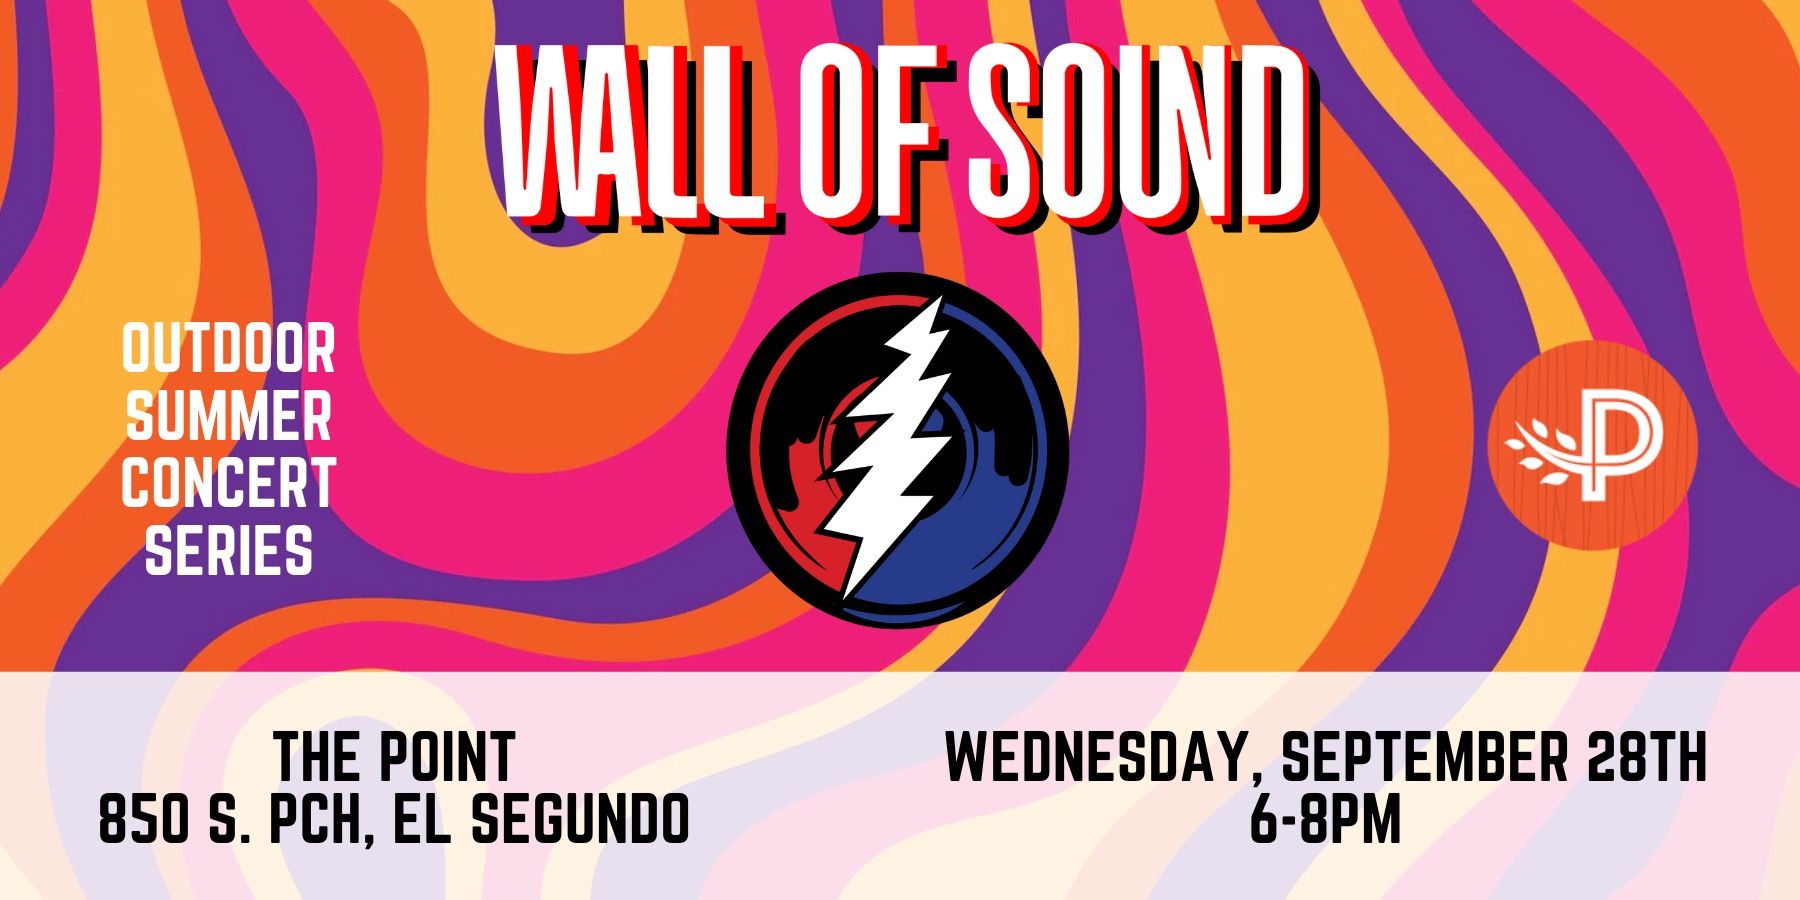 Wall of Sound plays the Point Summer Concert Series last show of Summer 2022 from 6-8pm promotional image